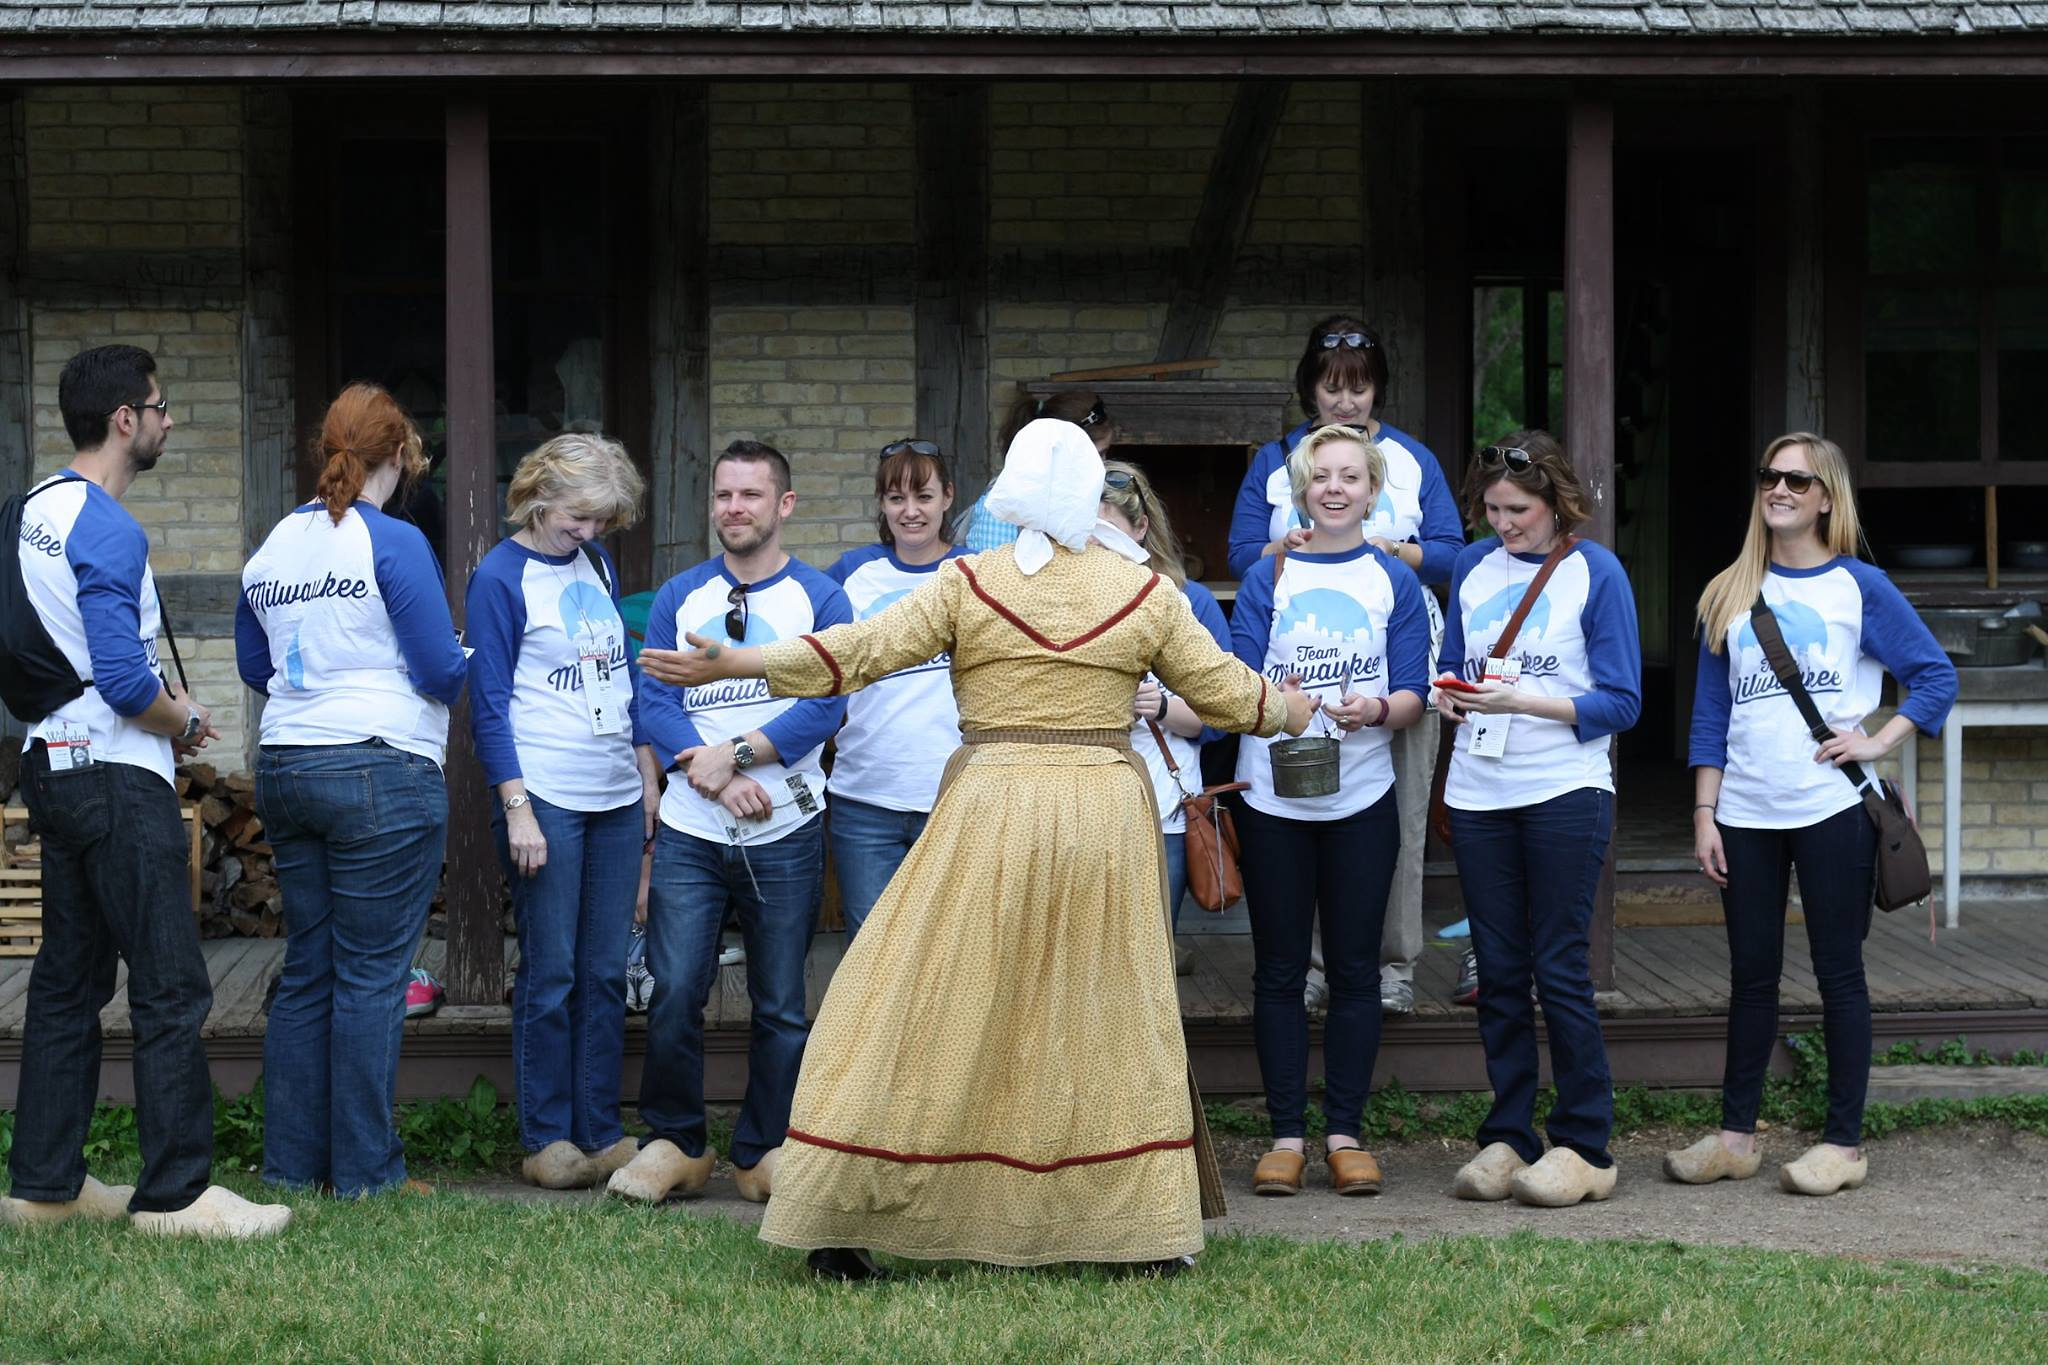 A woman from period time clothing talking to a group of people wearing blue team Milwaukee shirts on a tour